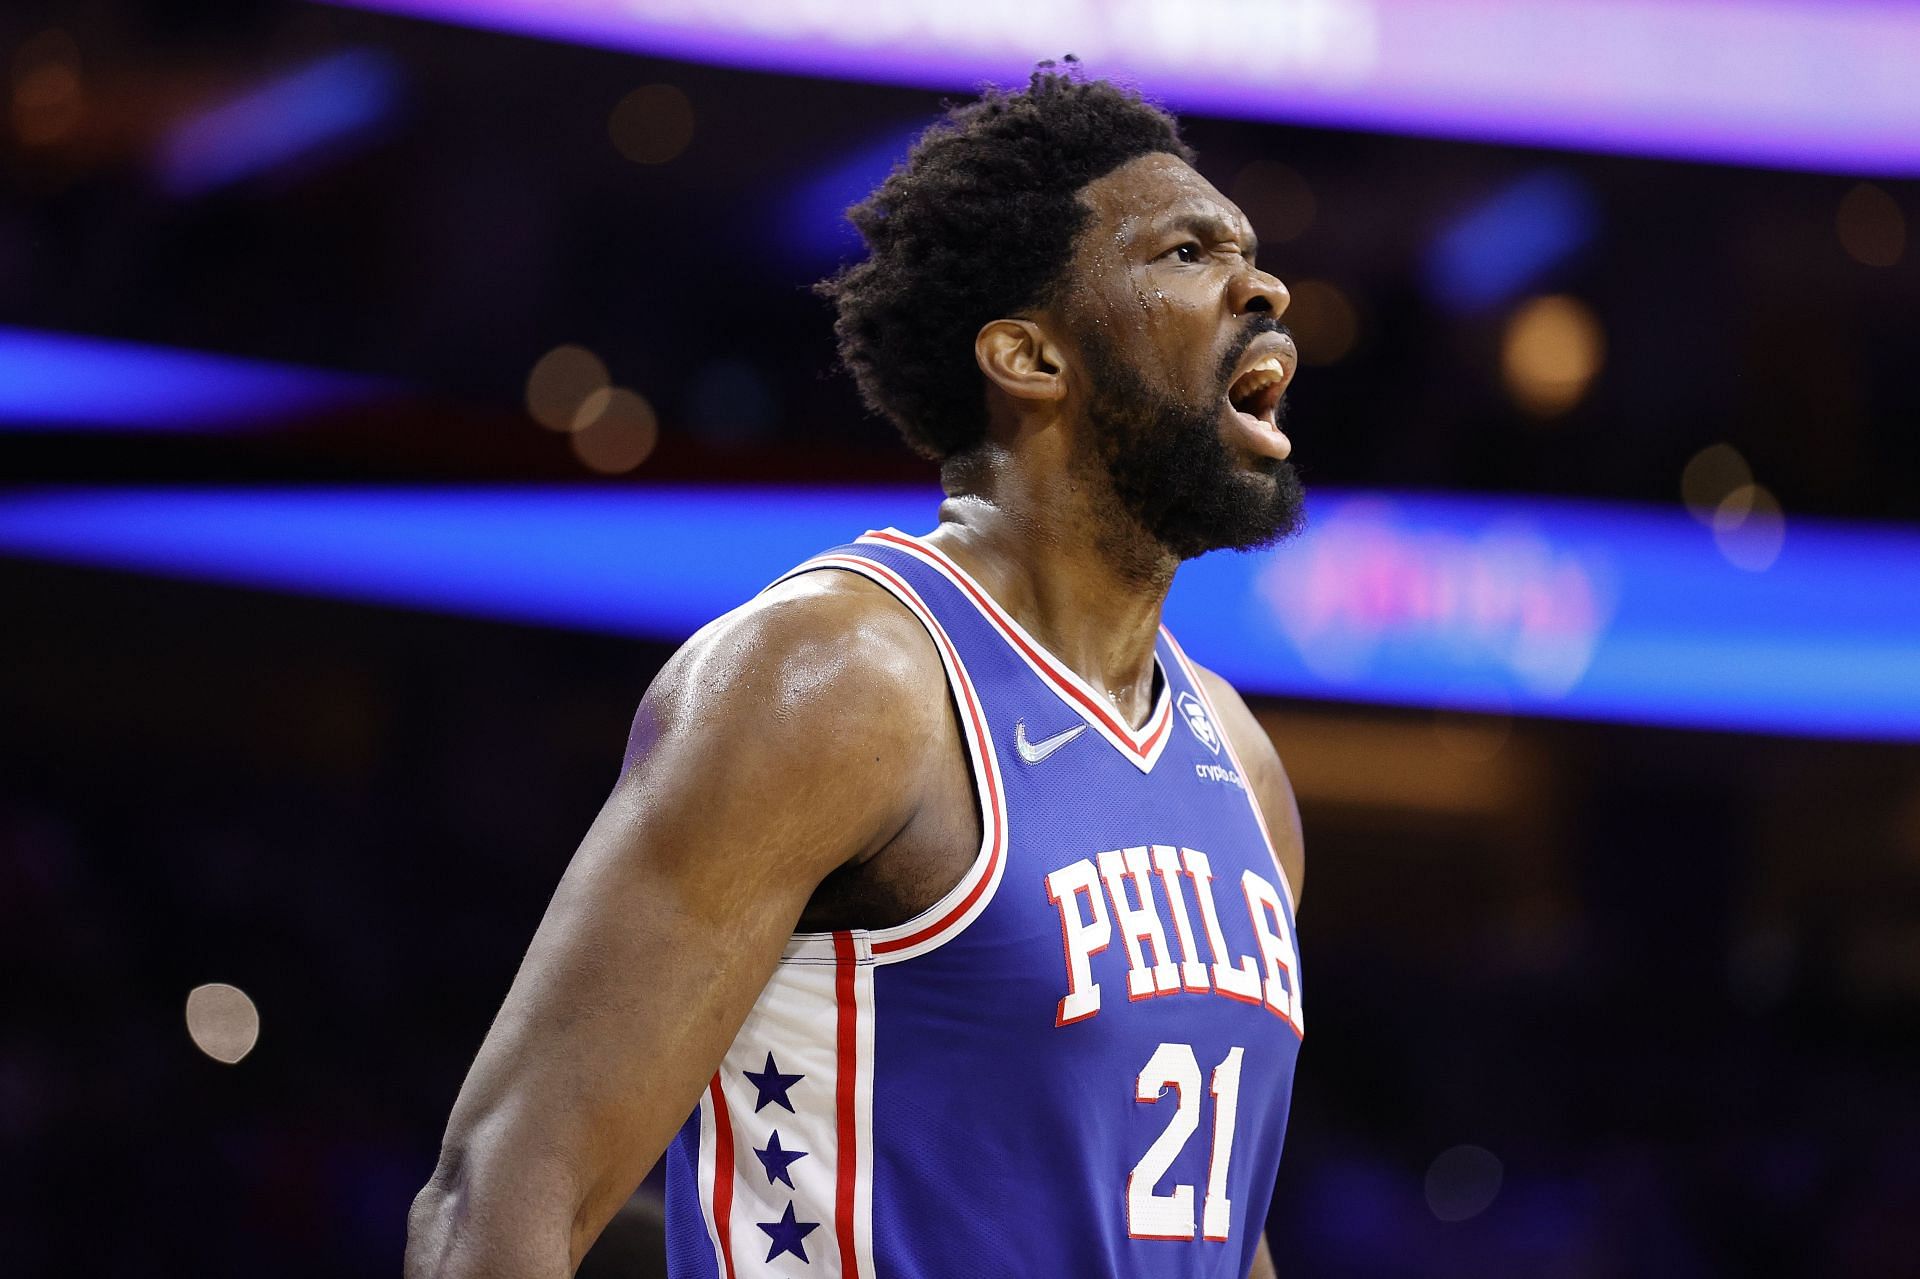 Joel Embiid #21 of the Philadelphia 76ers reacts after scoring during the second quarter against the Toronto Raptors during Game One of the Eastern Conference First Round at Wells Fargo Center on April 16, 2022 in Philadelphia, Pennsylvania.